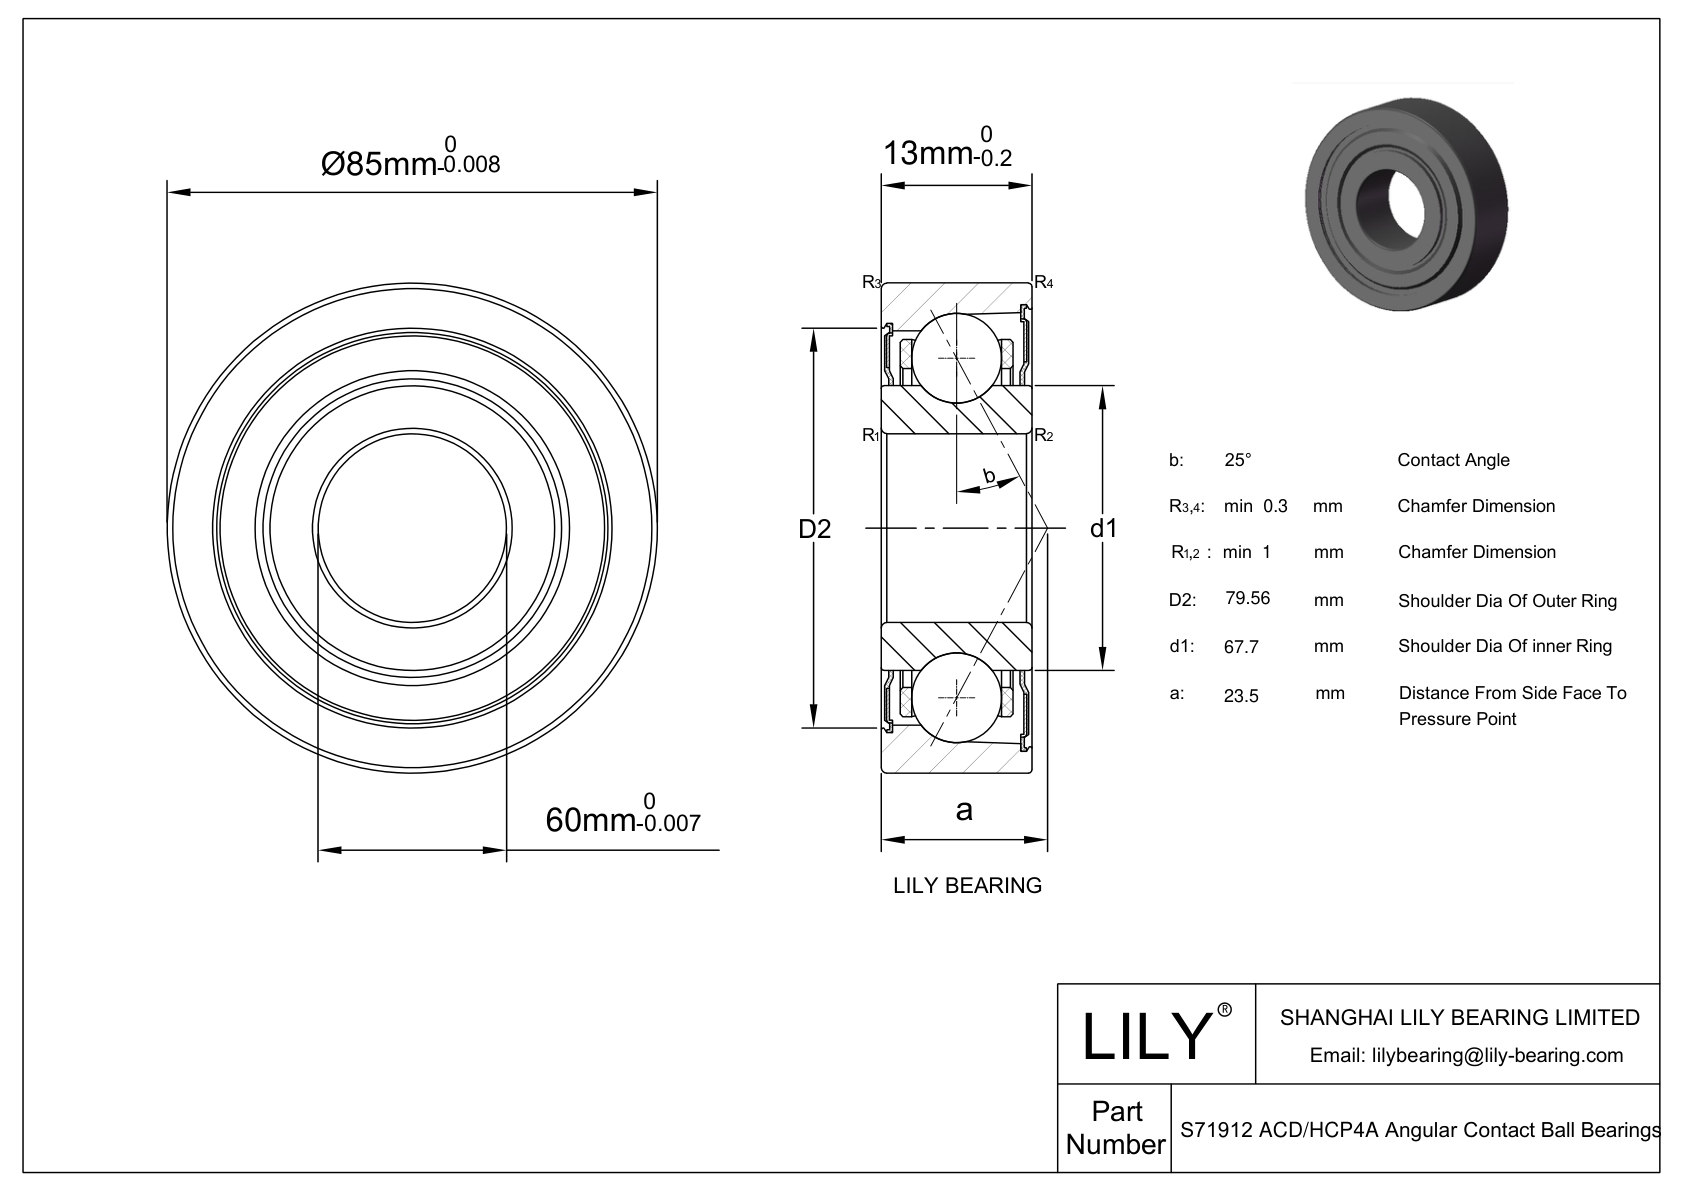 S71912 ACD/HCP4A Super Precision Angular Contact Ball Bearings cad drawing